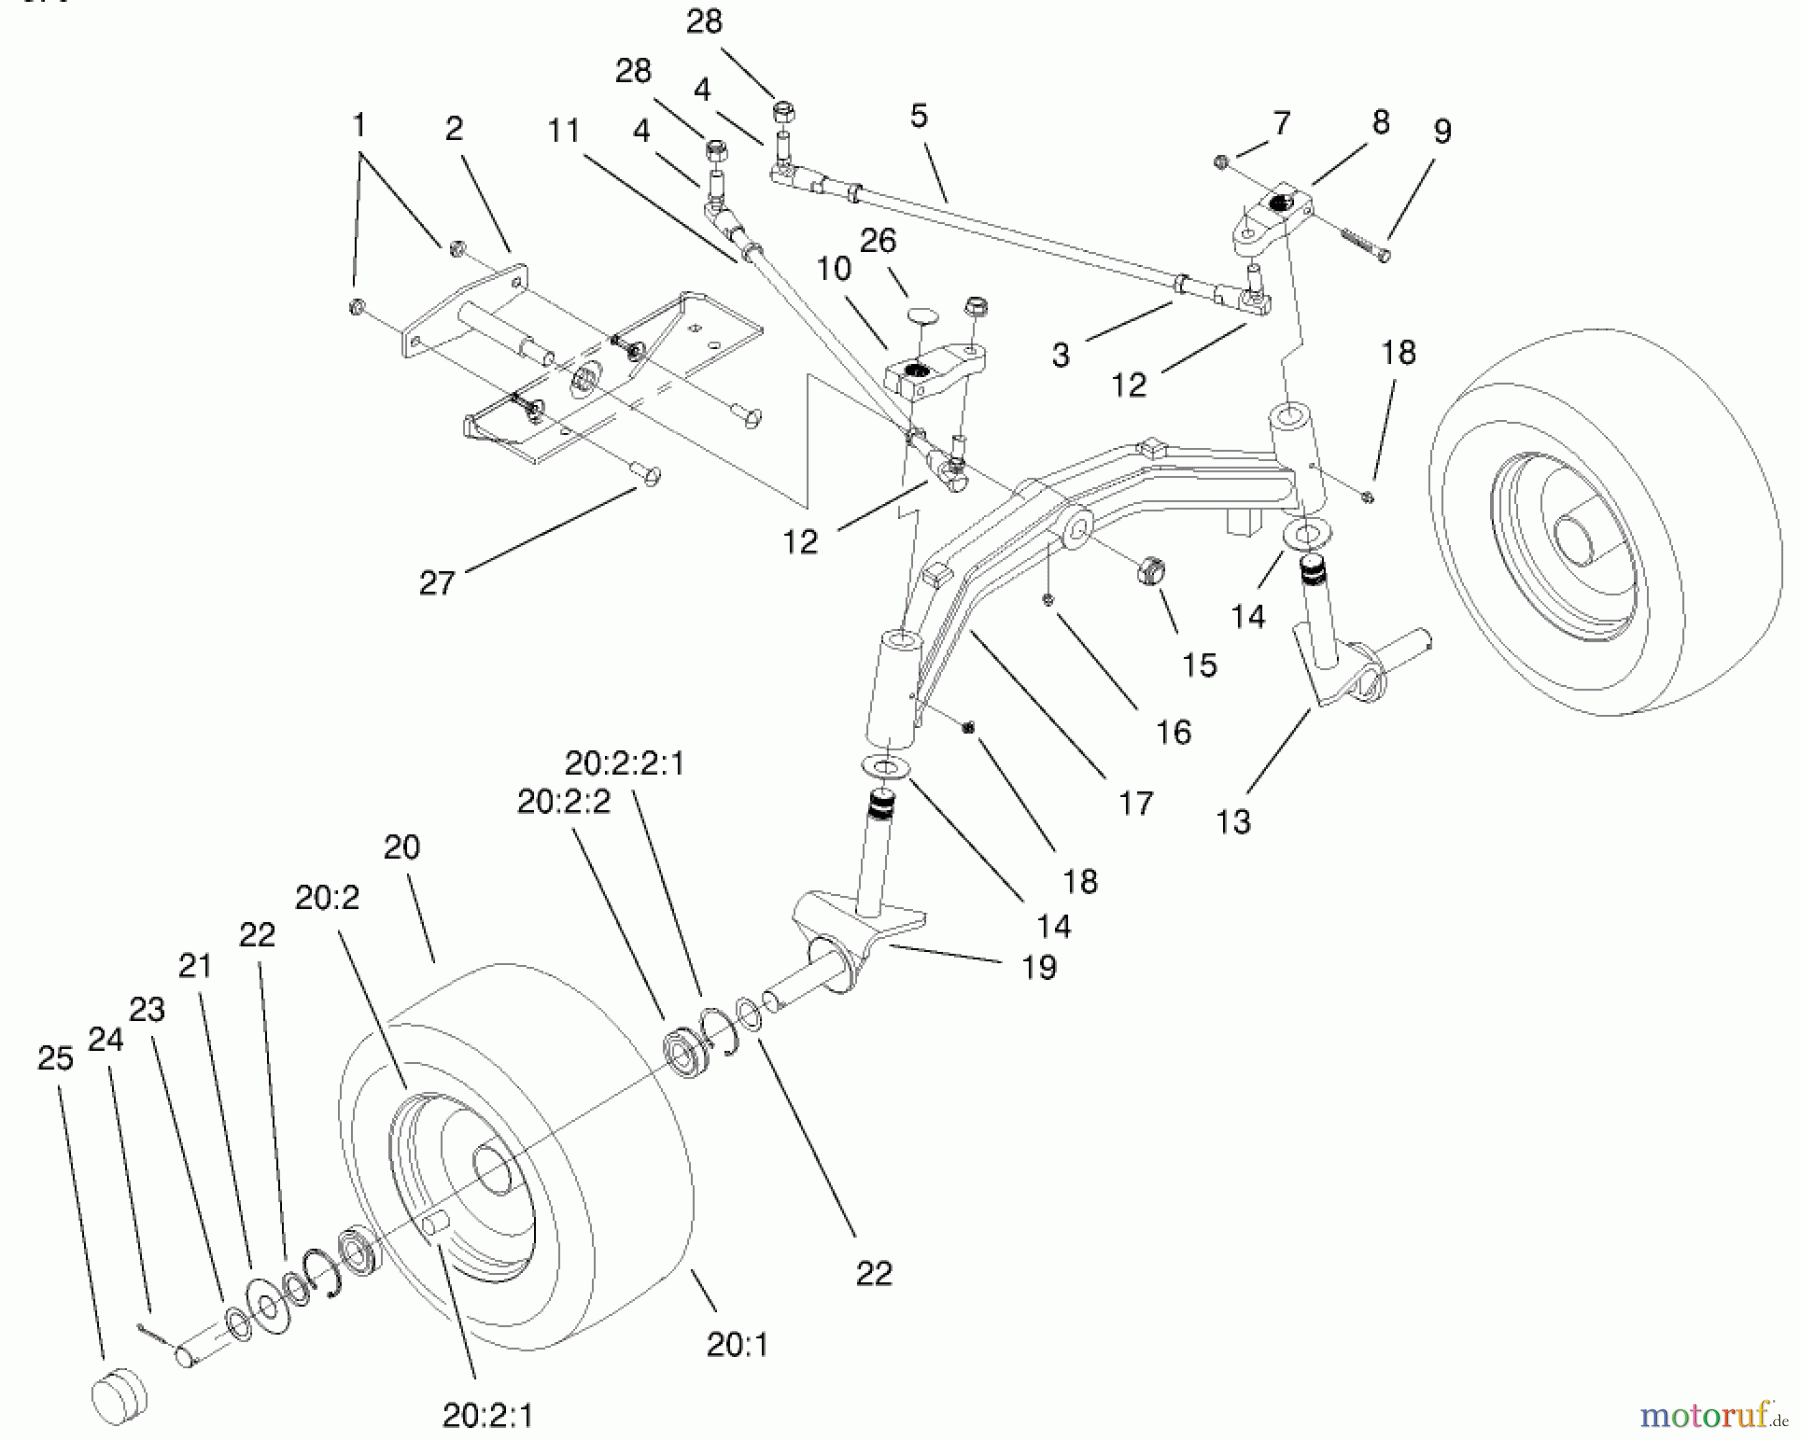  Toro Neu Mowers, Lawn & Garden Tractor Seite 1 73471 (518xi) - Toro 518xi Garden Tractor, 2000 (200000001-200999999) TIE RODS, SPINDLE, & FRONT AXLE ASSEMBLY